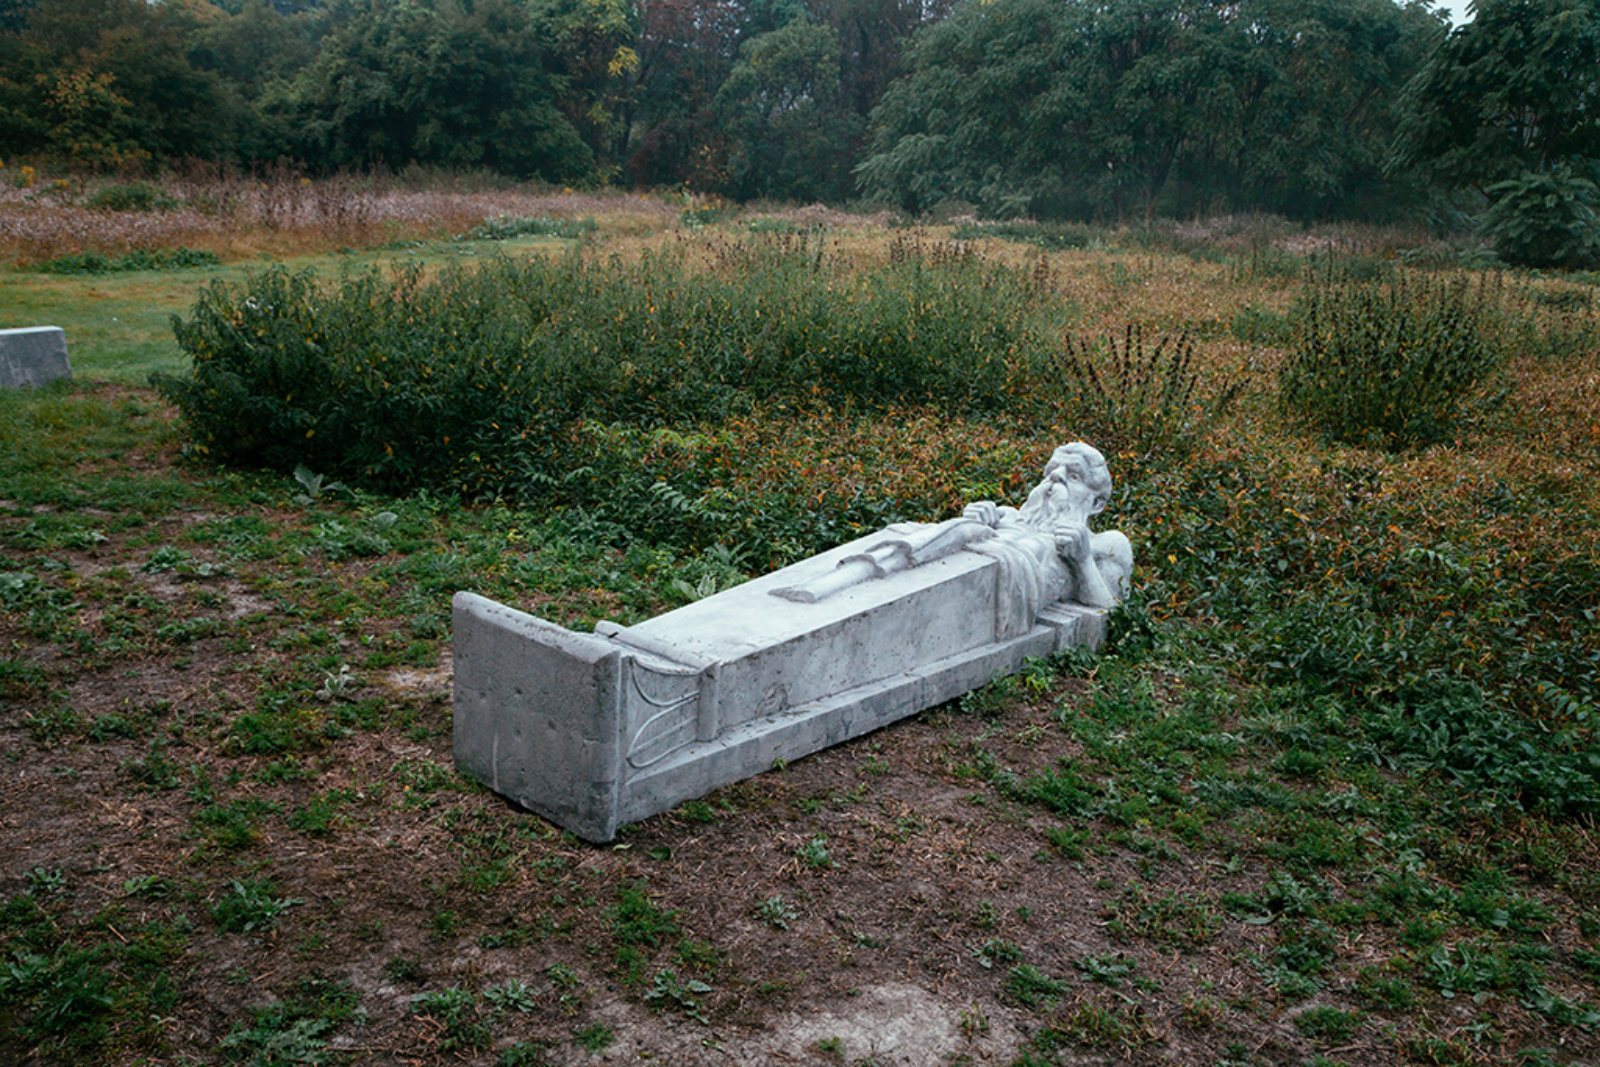 Duane Linklater, Monsters for Beauty, Permanence and Individuality, 2017, 14 cast concrete sculptures, dimensions variable. Installation view, Lower Don River Trail, Don River Valley Park, Toronto, 2017